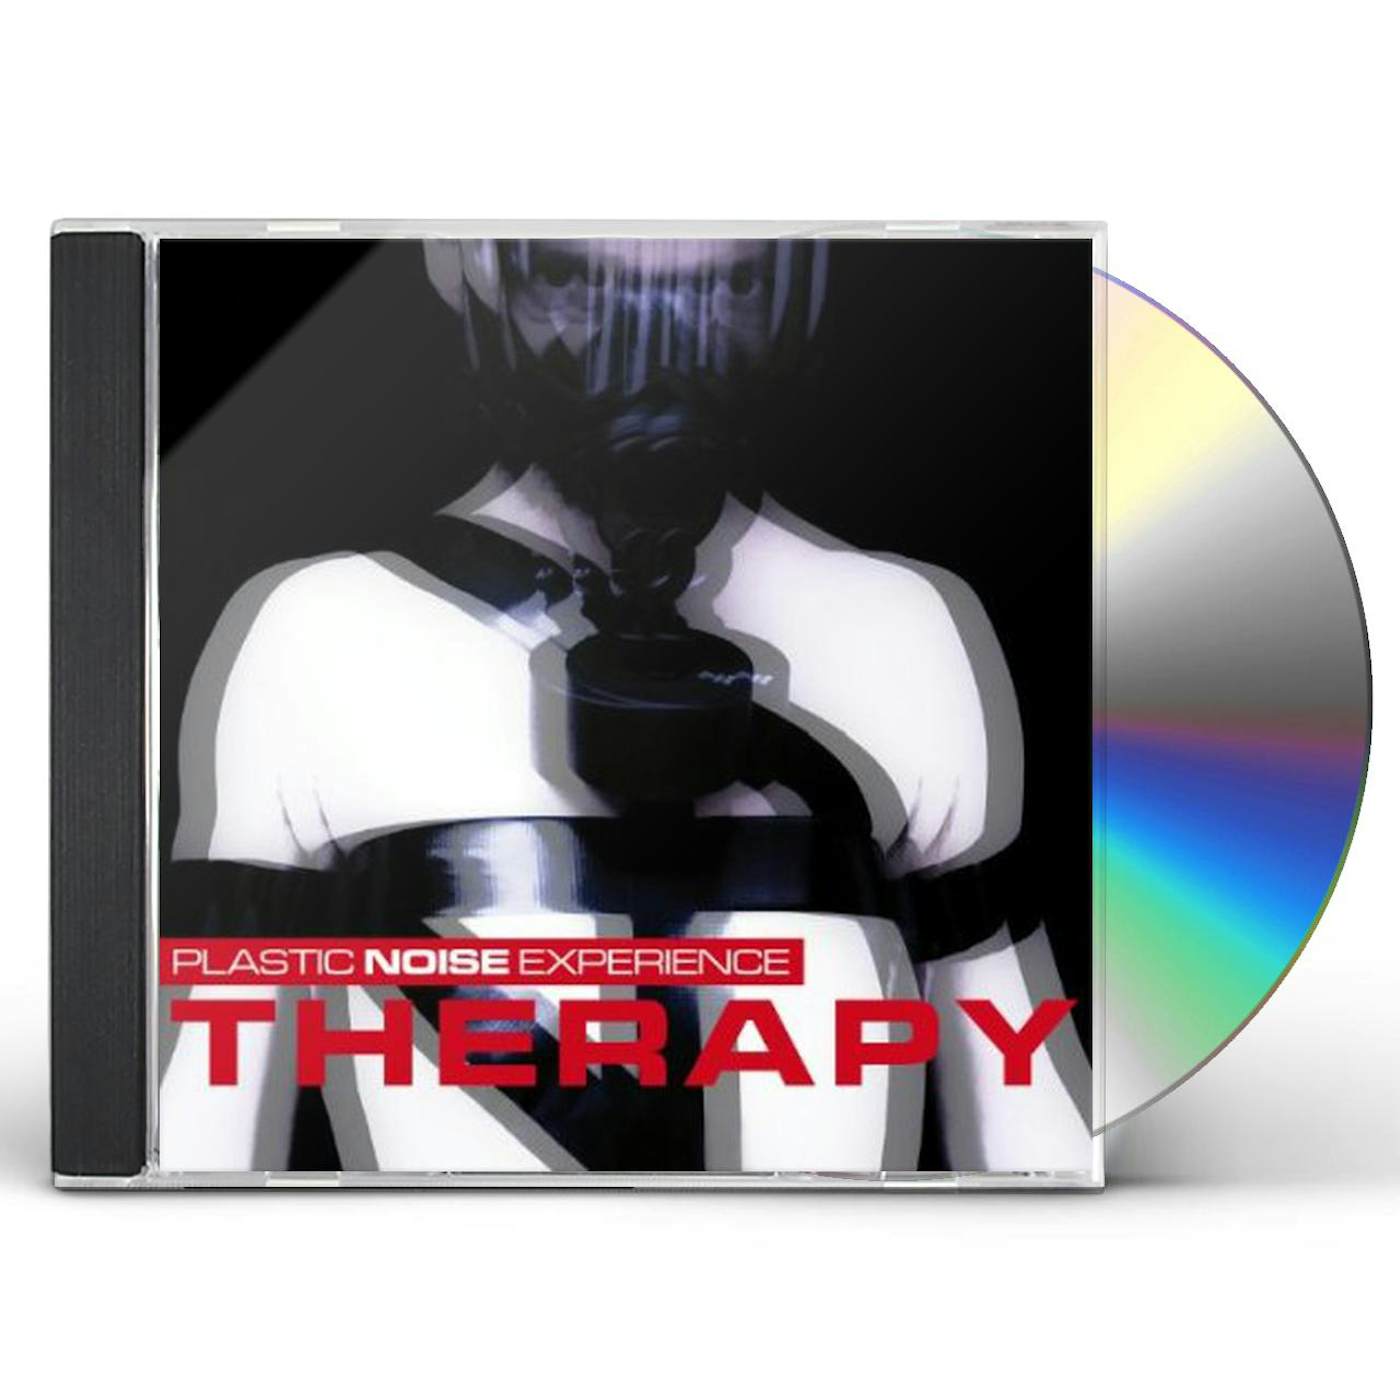 The Plastic Noise Experience THERAPY CD